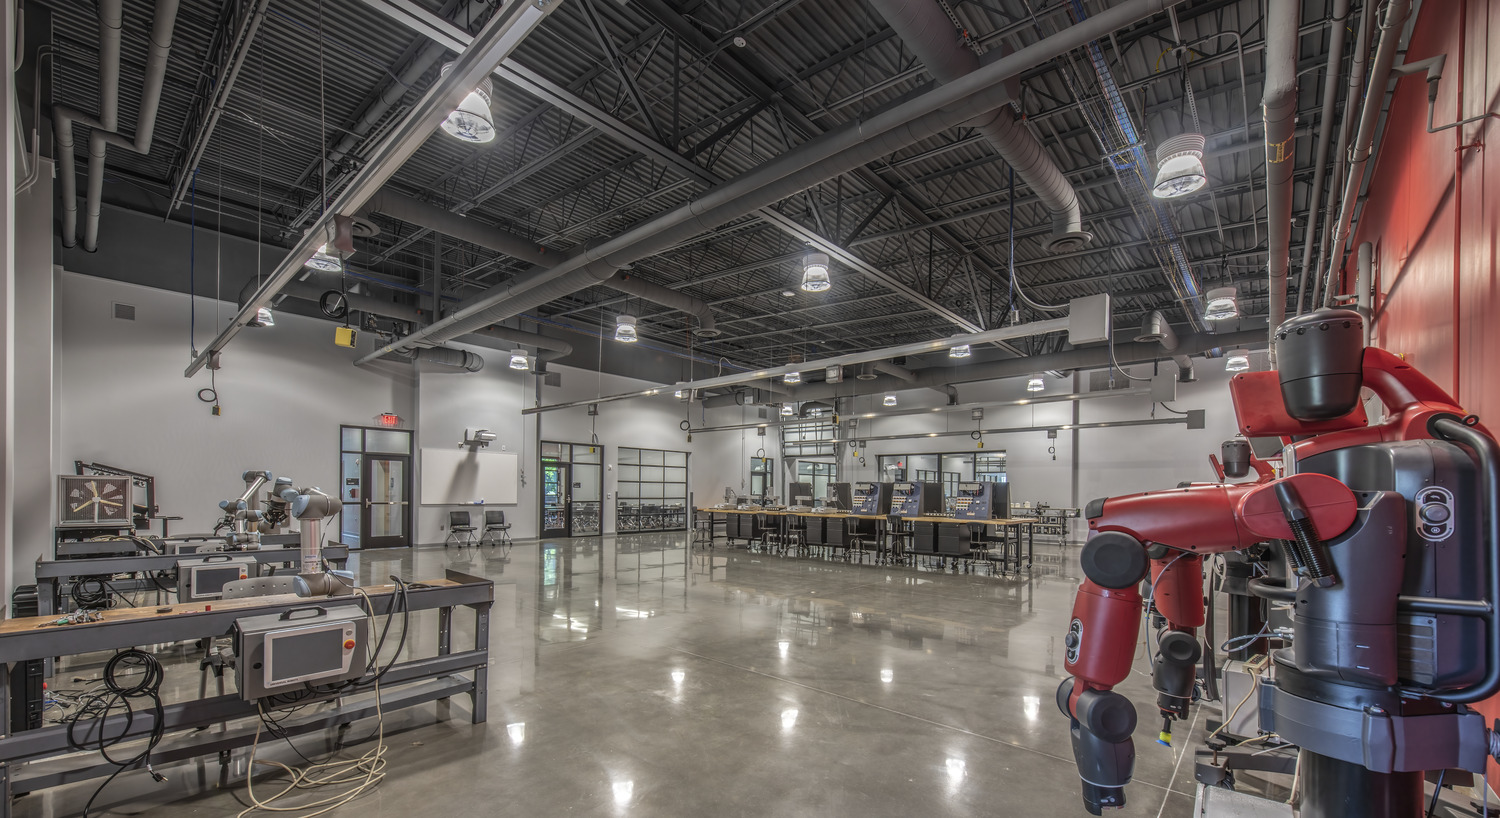 Image shows the Center for Advanced Manufacturing and Emerging Technologies (CAMET) at Chattahoochee Technical College. Image shows a classroom/lab space that has tables for students and has a very industrial look and feel. 